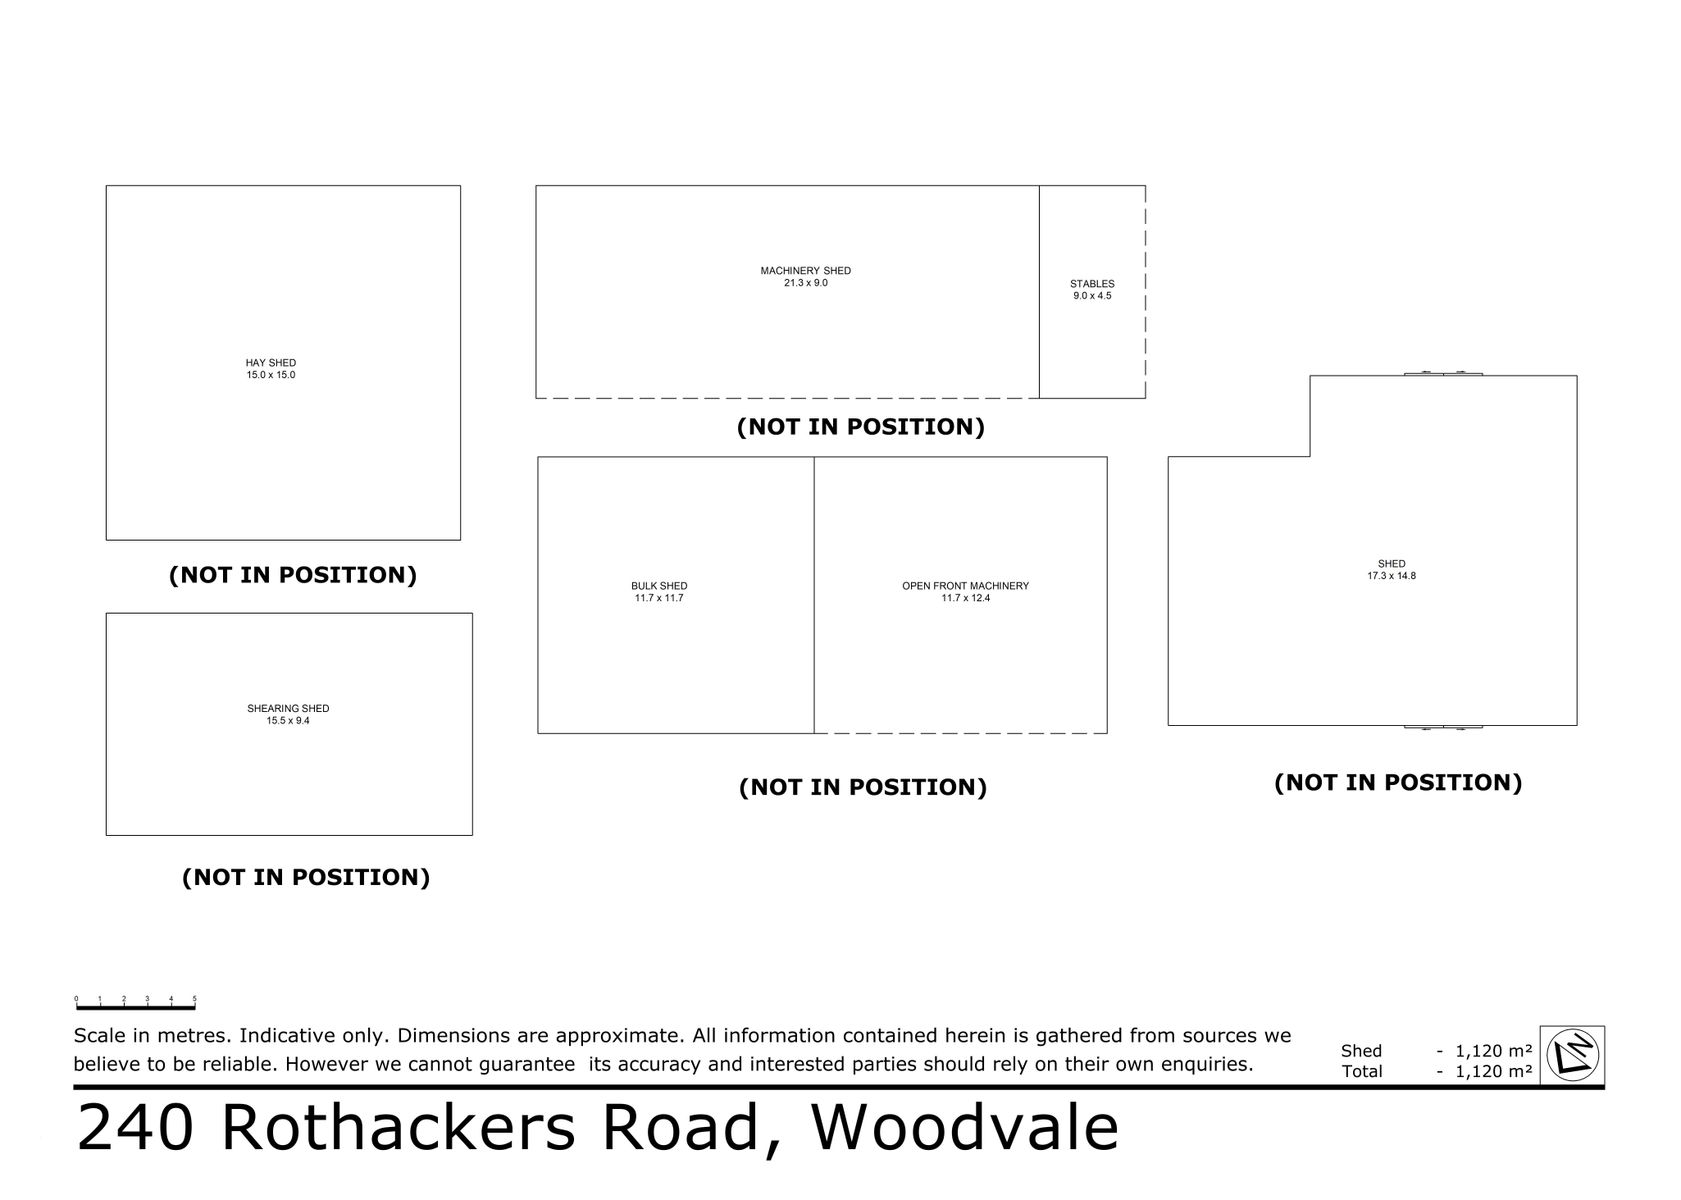 printsize 240 Rothackers Road Woodvale HiRes Shed 1 (1)